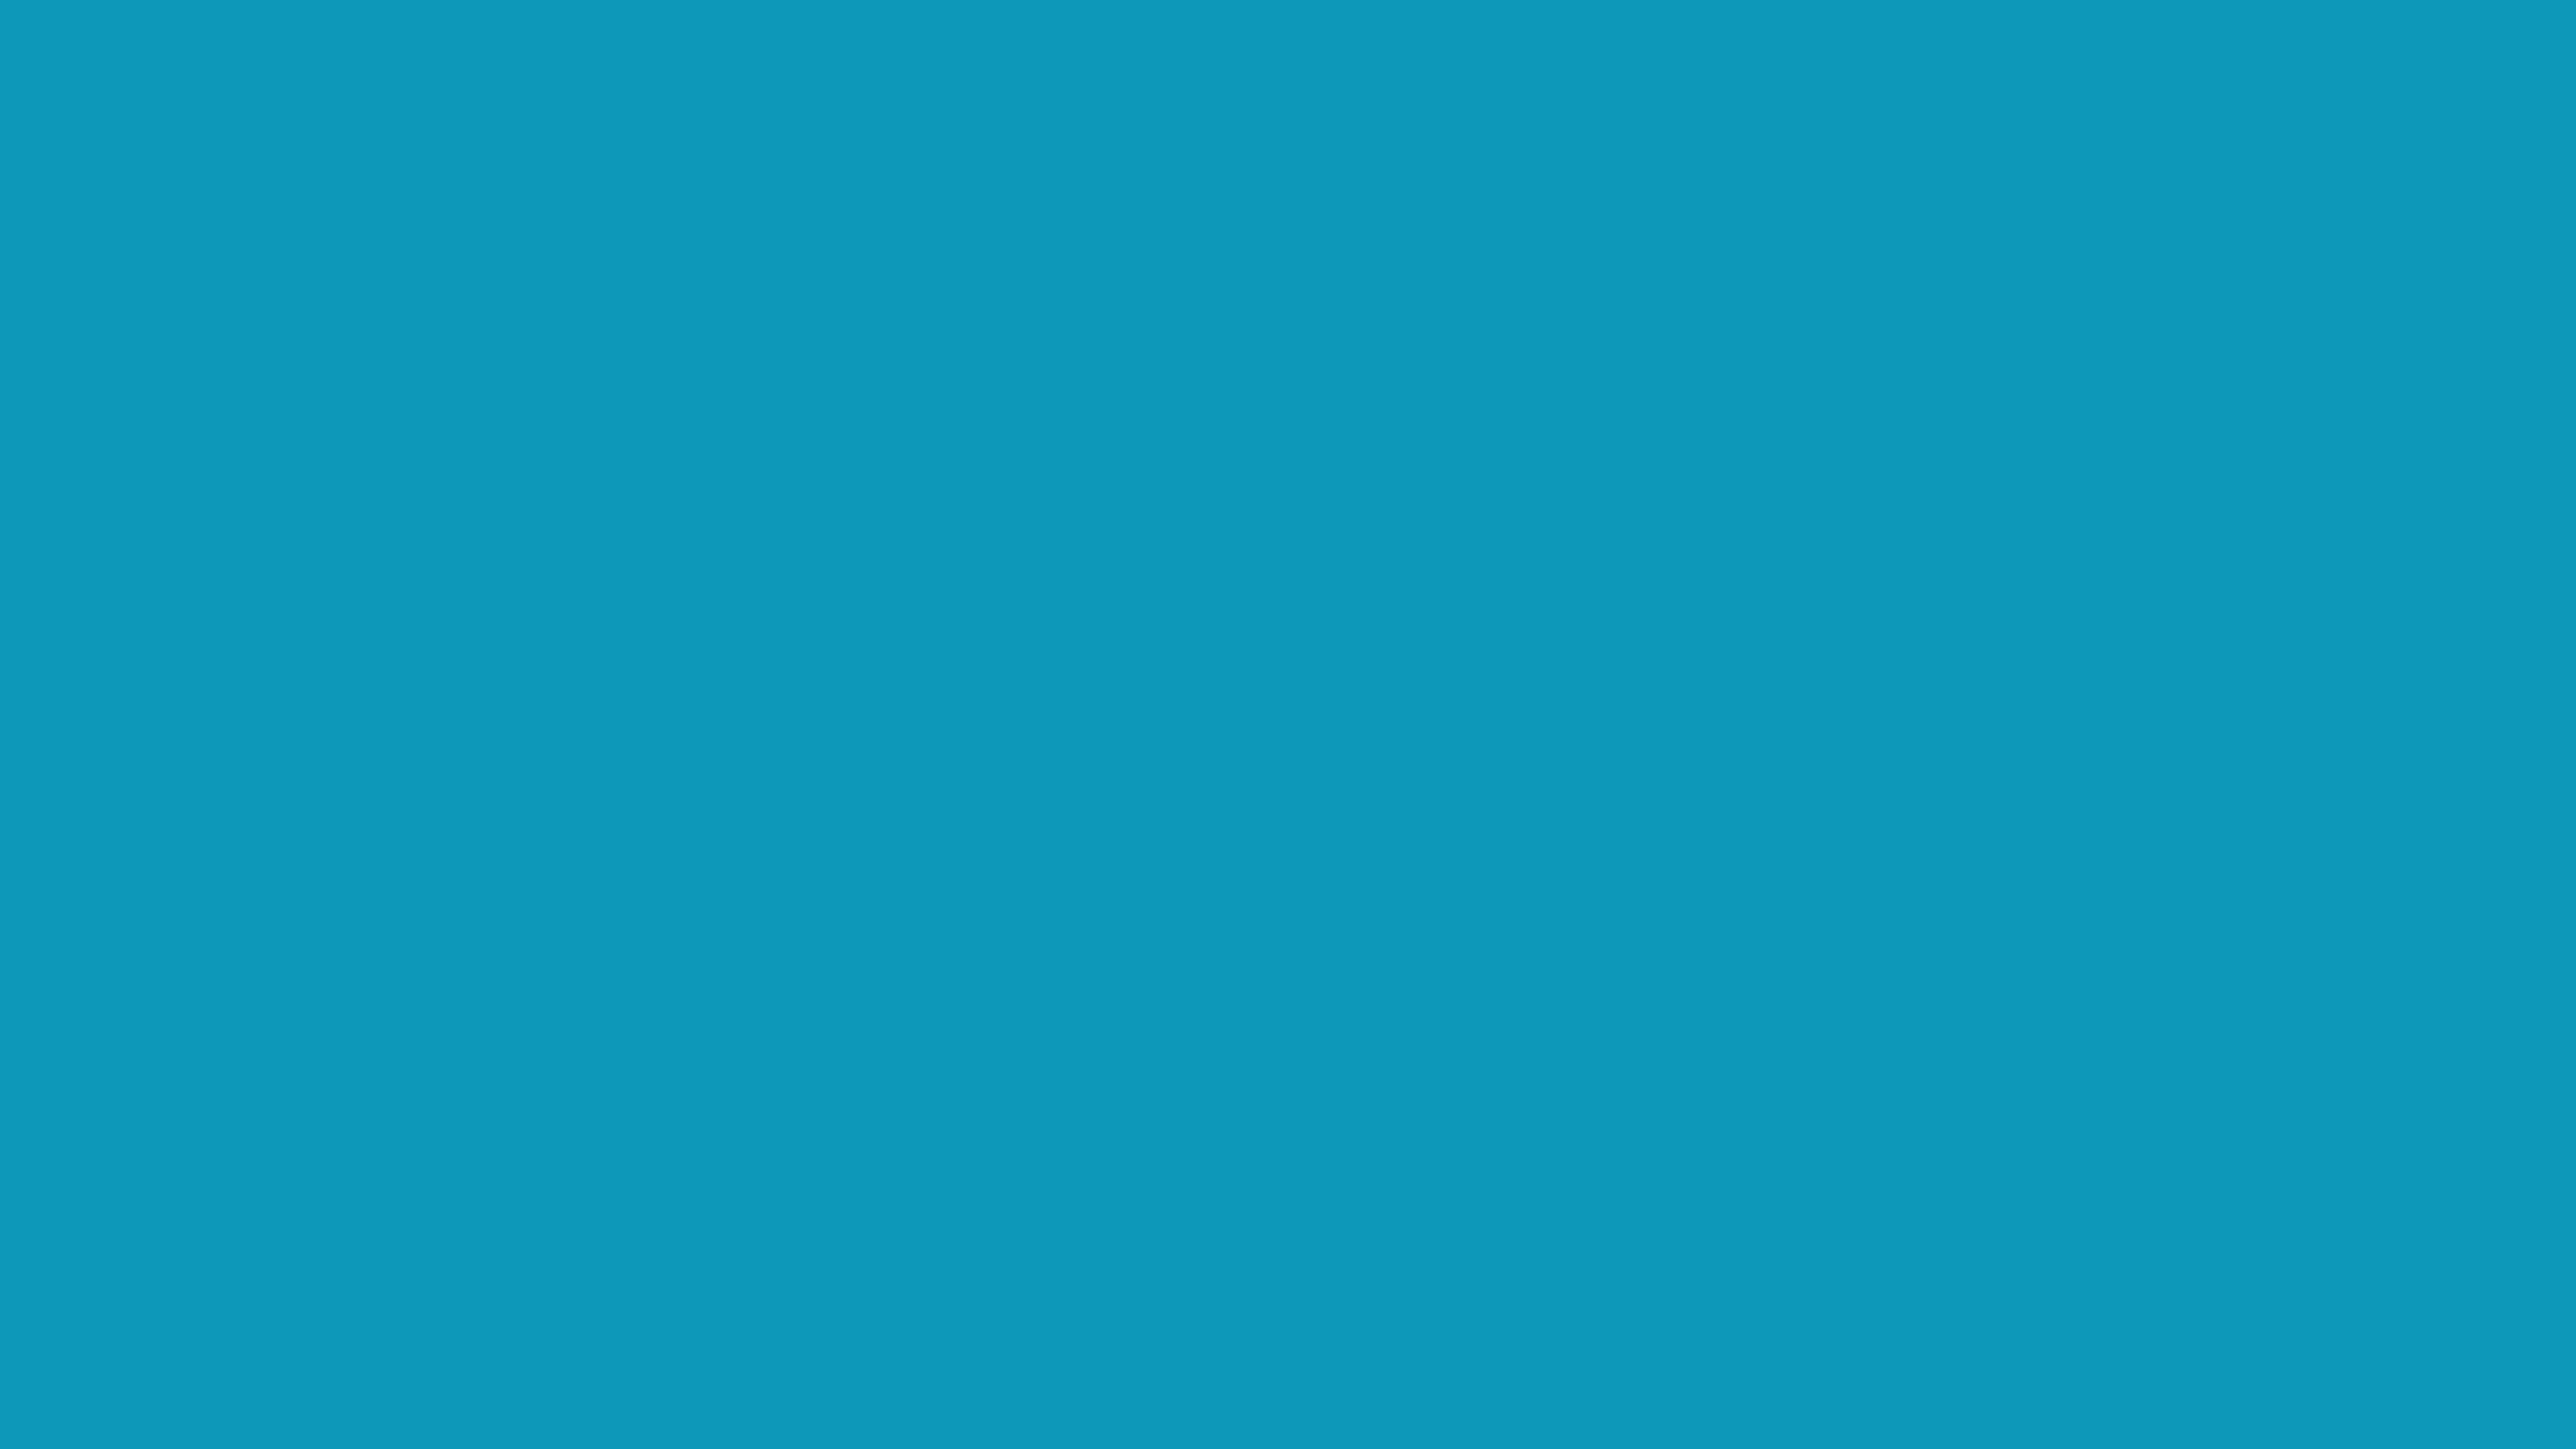 7680x4320 Blue-green Solid Color Background